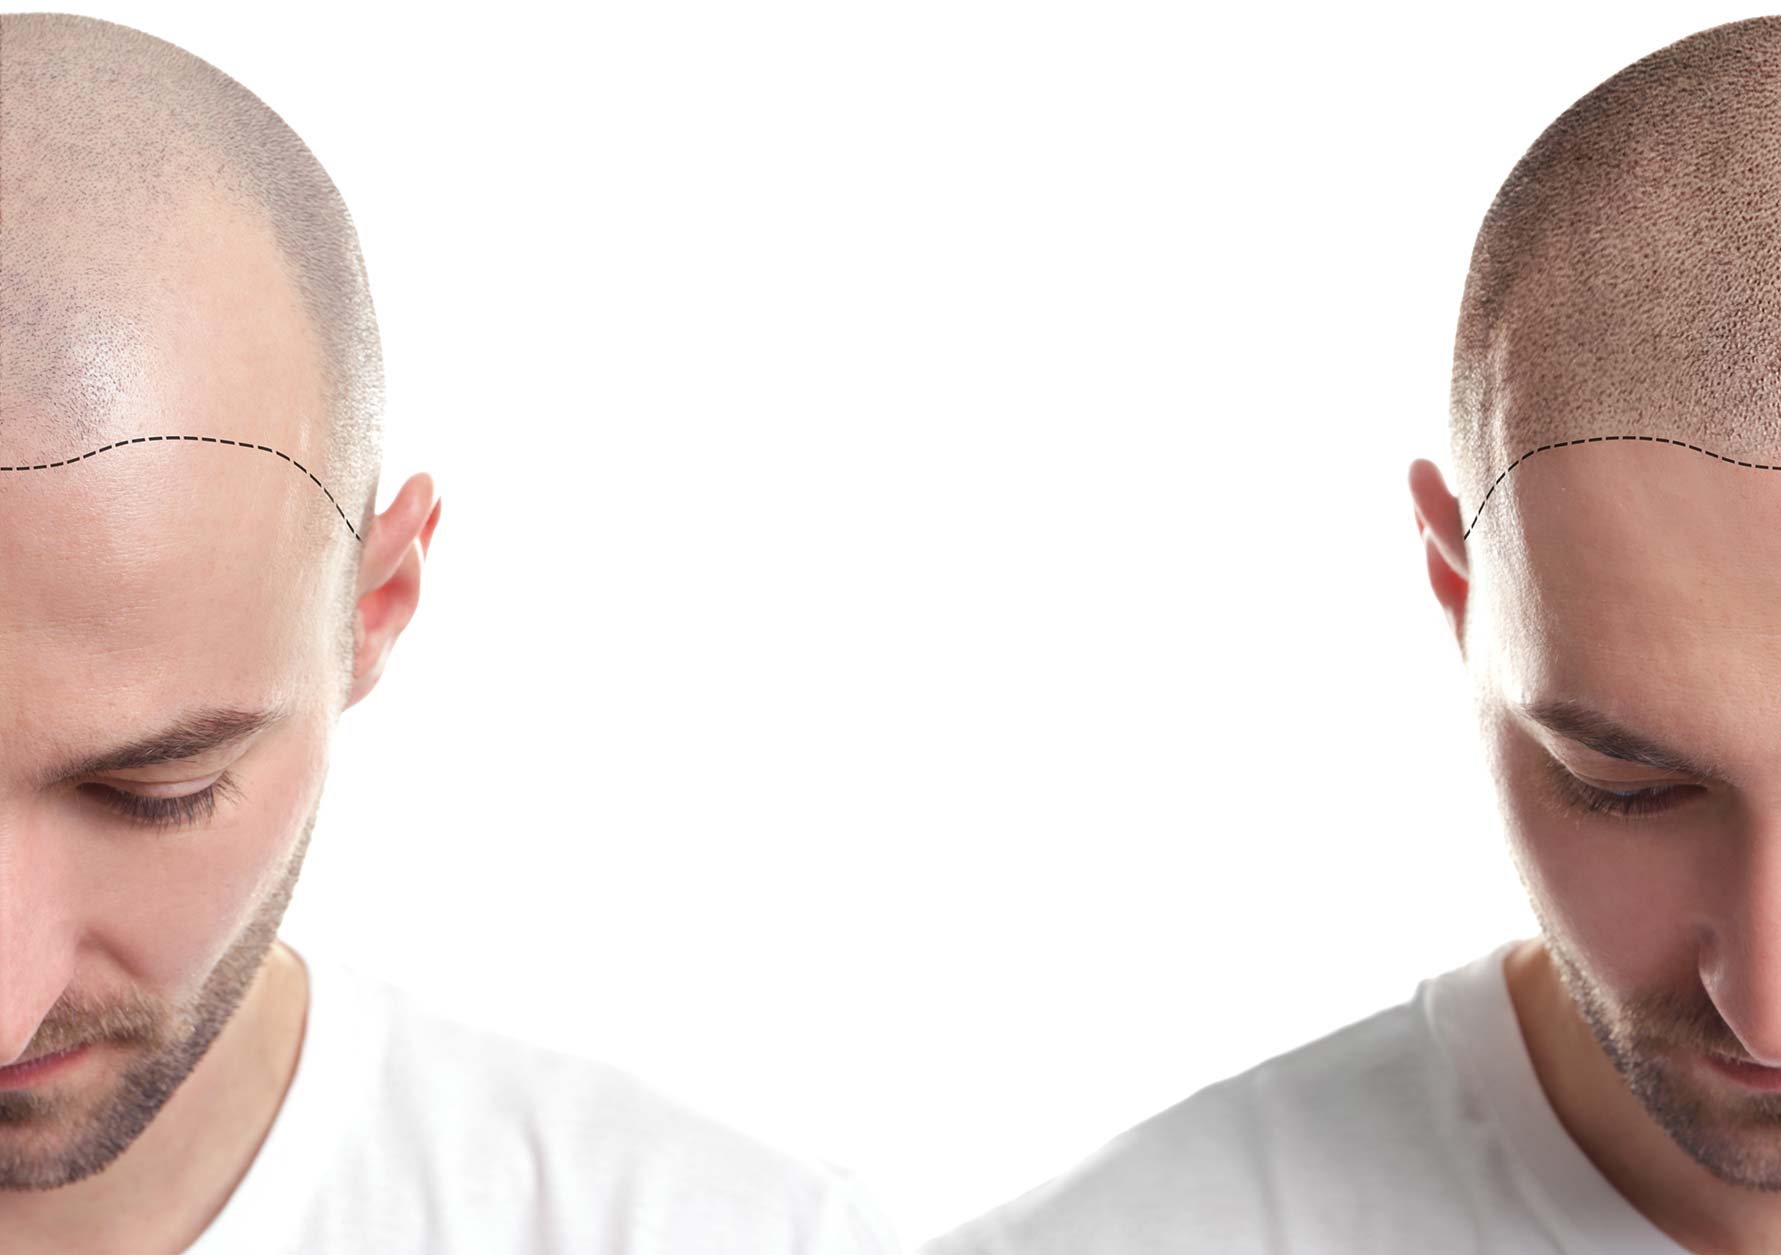 Before and after hair transplantation.